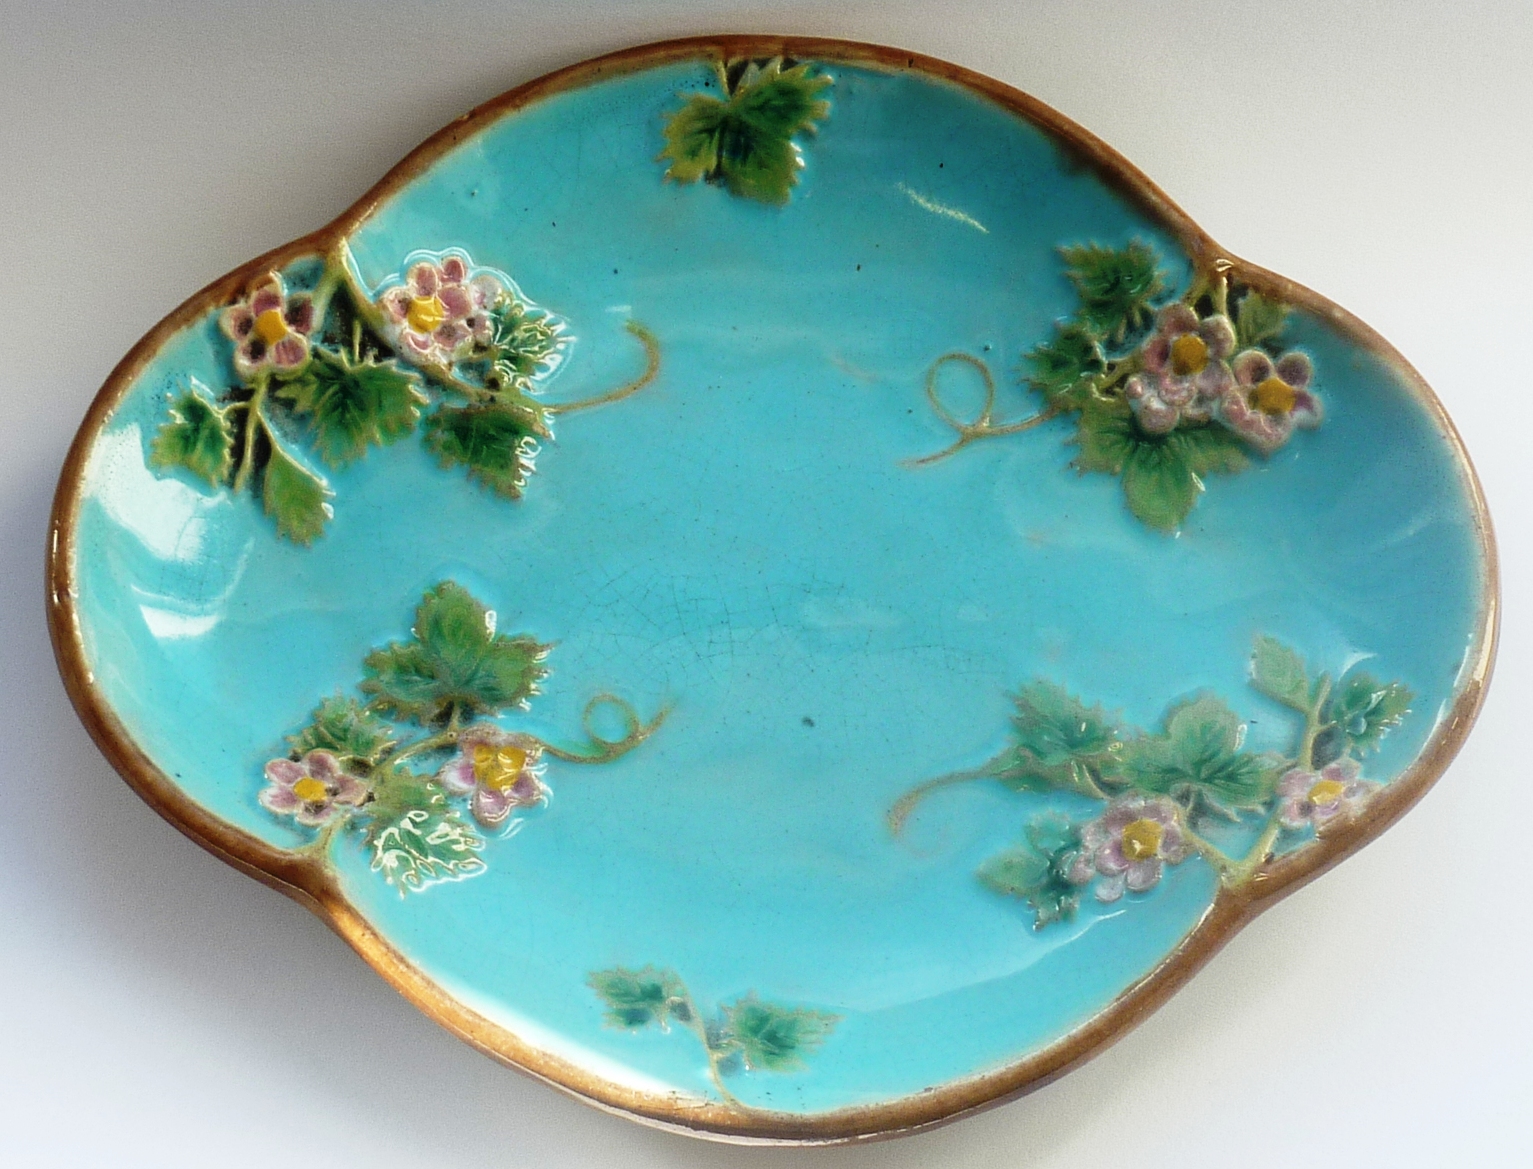 A 19th Century George Jones Majolica Dish in typical colouring, registration diamond to back for